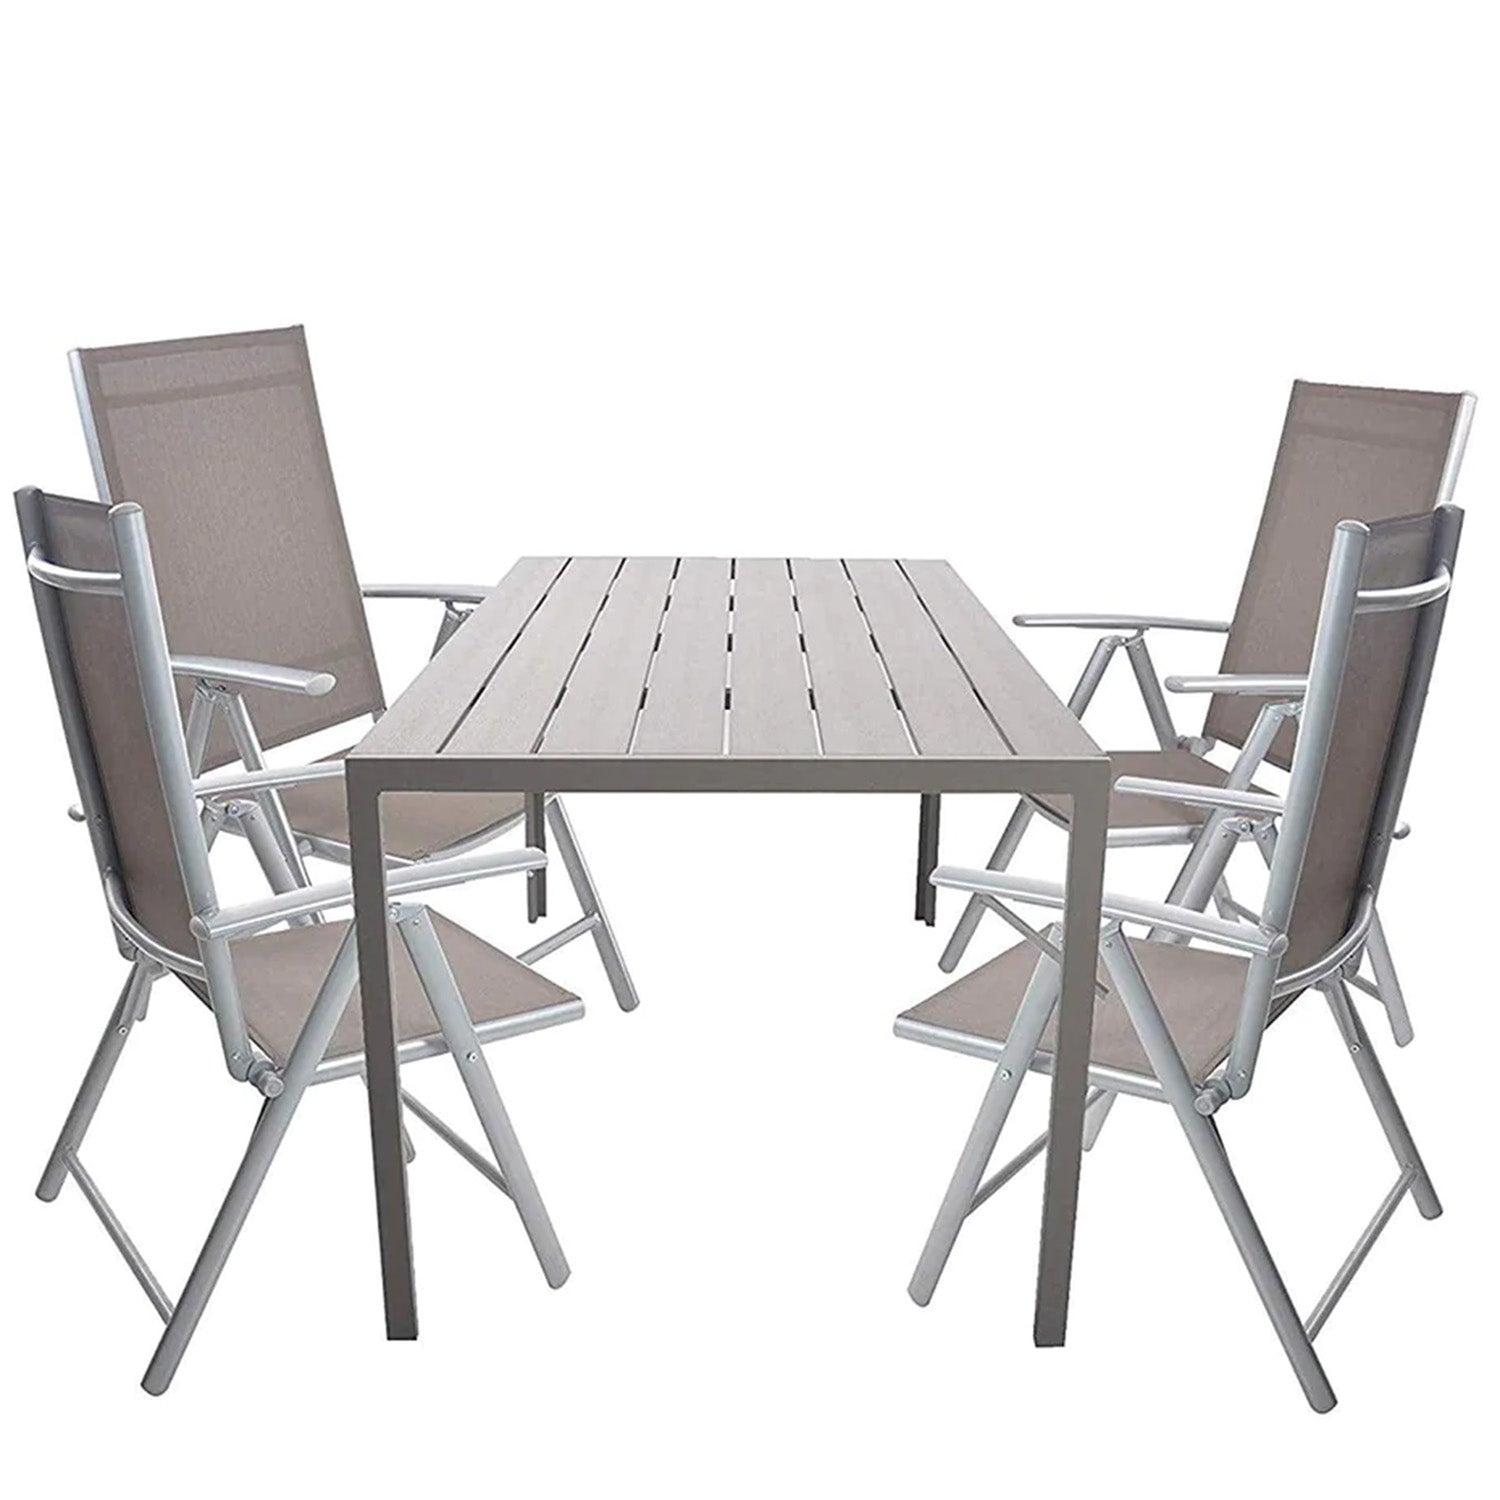 5 Piece Outdoor Patio Table Set, 1 Dining Table 55" for 4-6 with 4 Folding Chairs Aluminum Frame Outdoor Dining Set